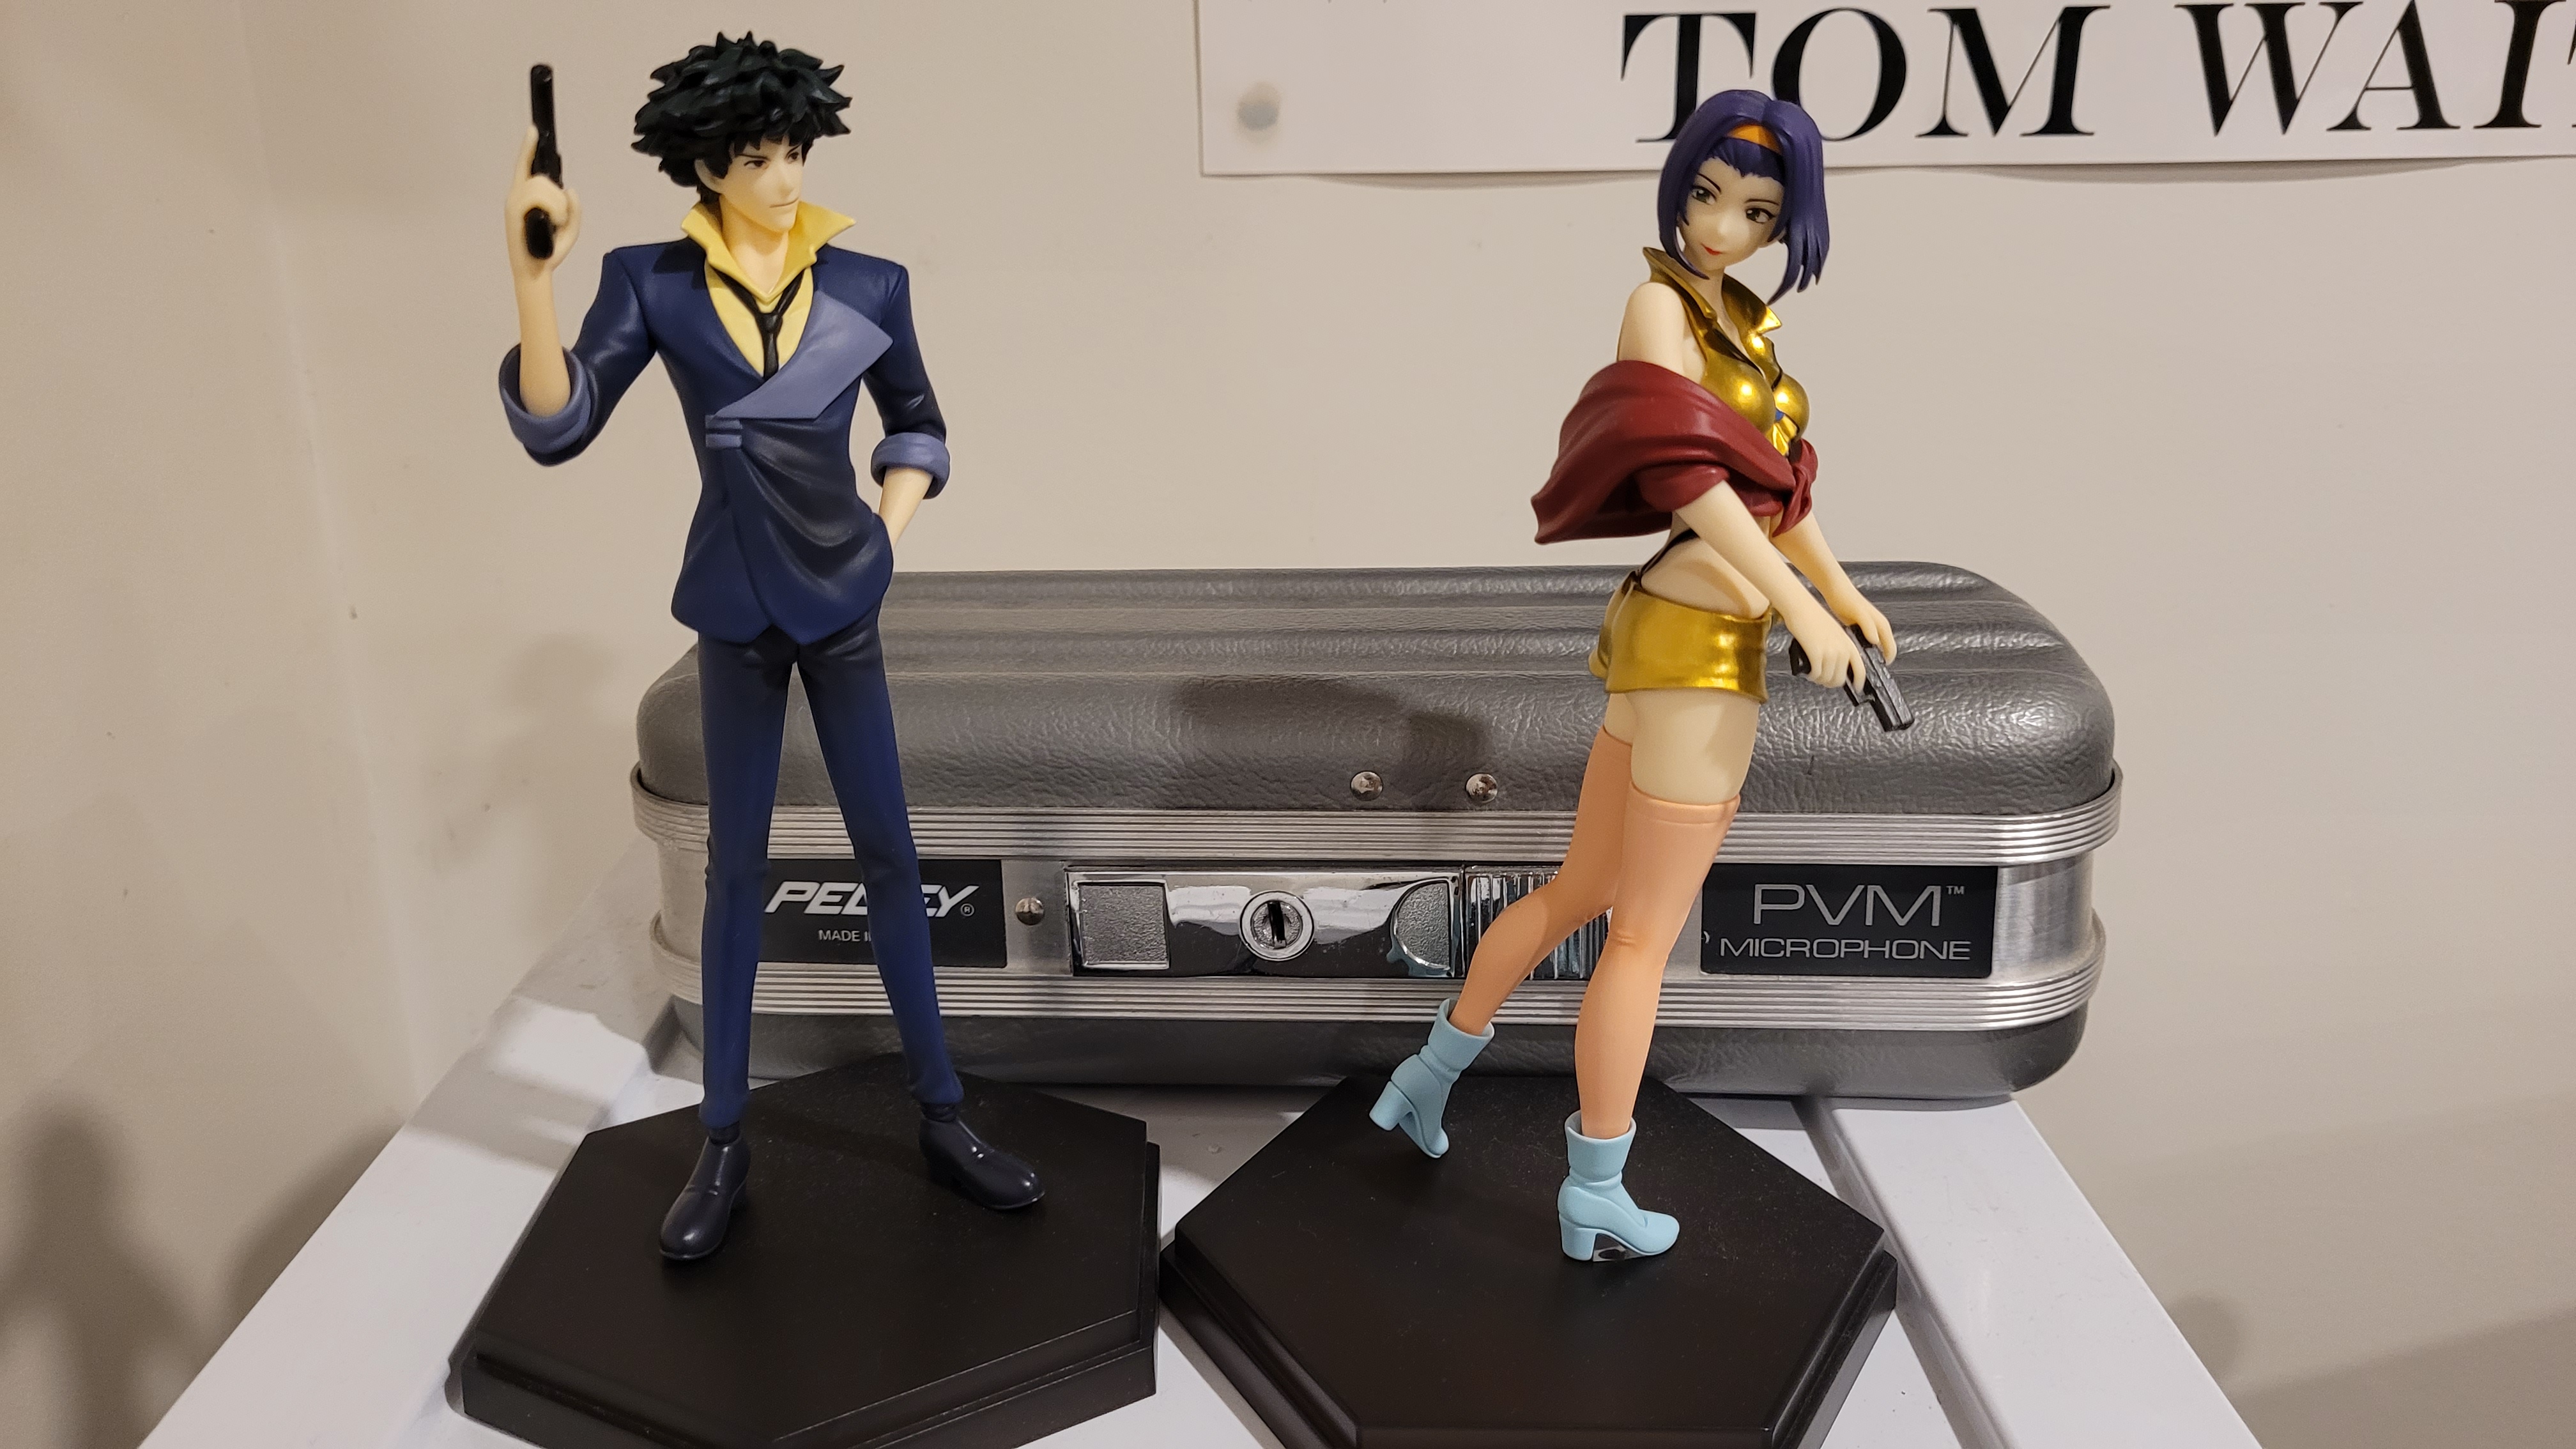 Spike and Fay figures